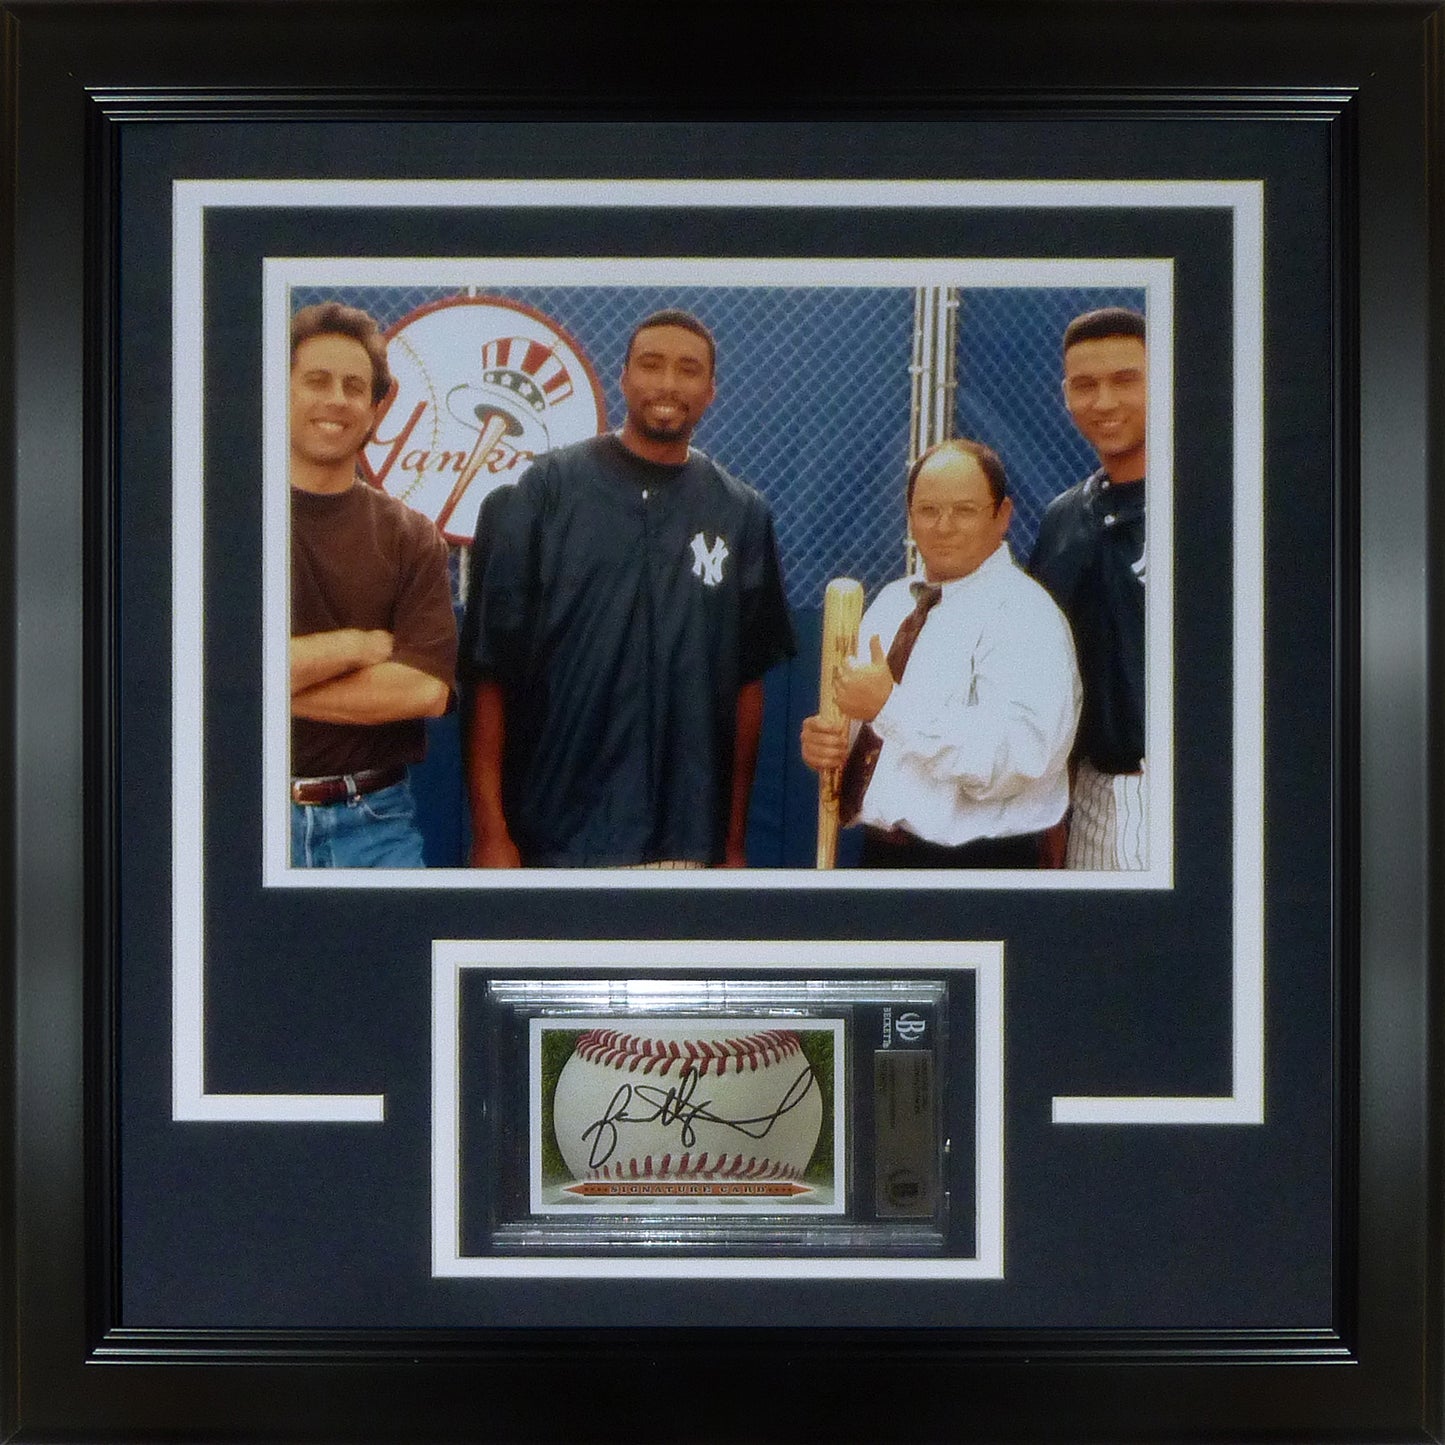 Jason Alexander Autographed Card Deluxe Framed with Seinfeld New York Yankees 8x10 Photo - Beckett